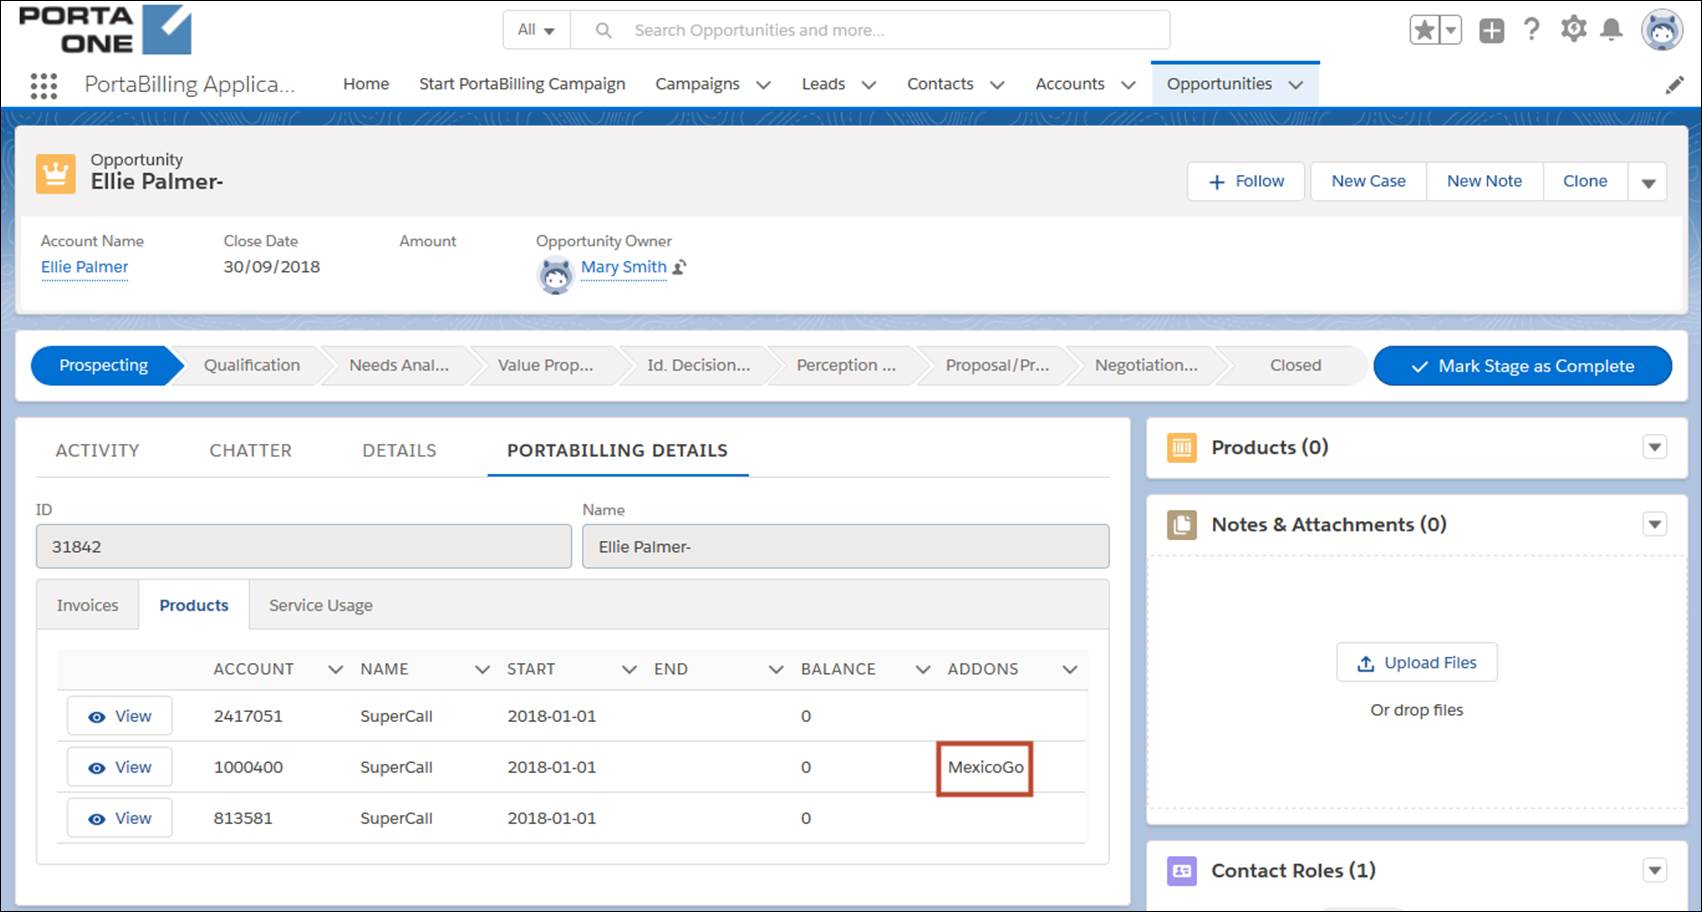 Review the add-on product via CRM